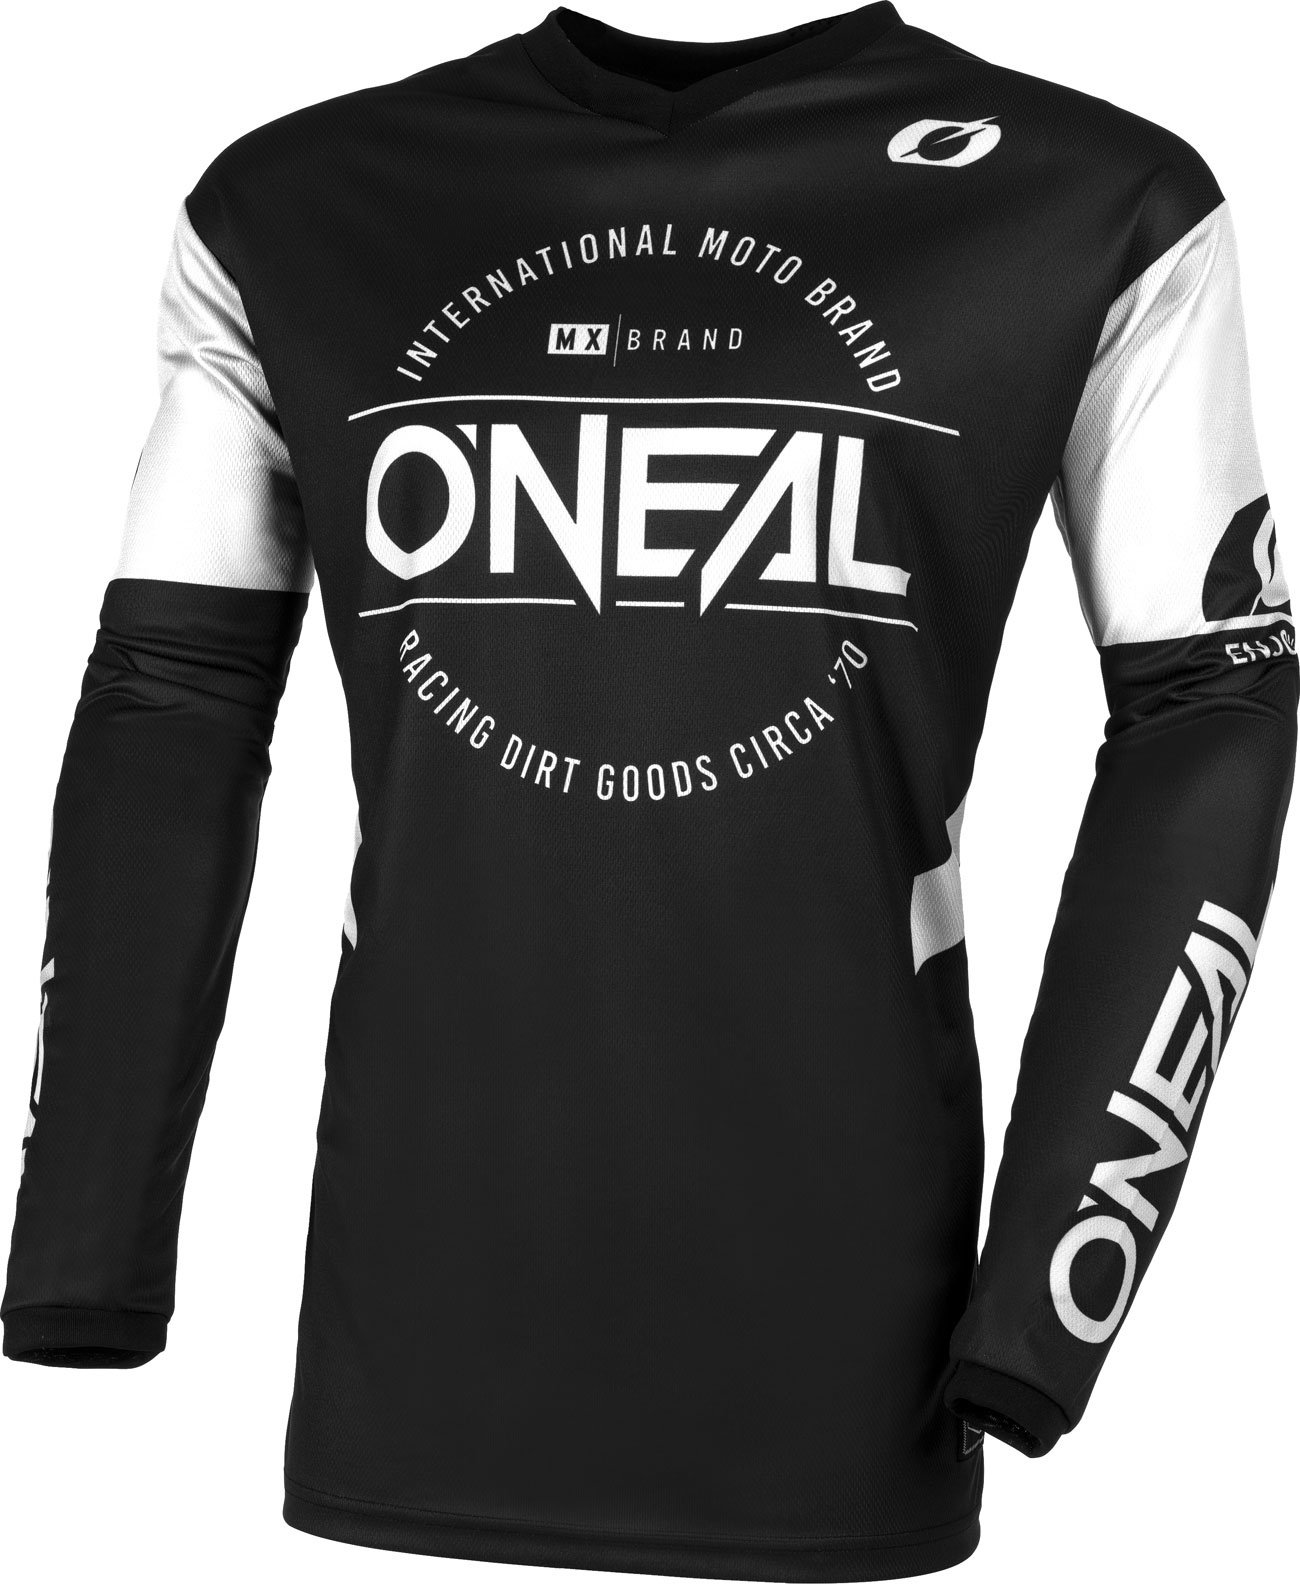 ONeal Element Brand S23, jersey - Noir/Blanc - S